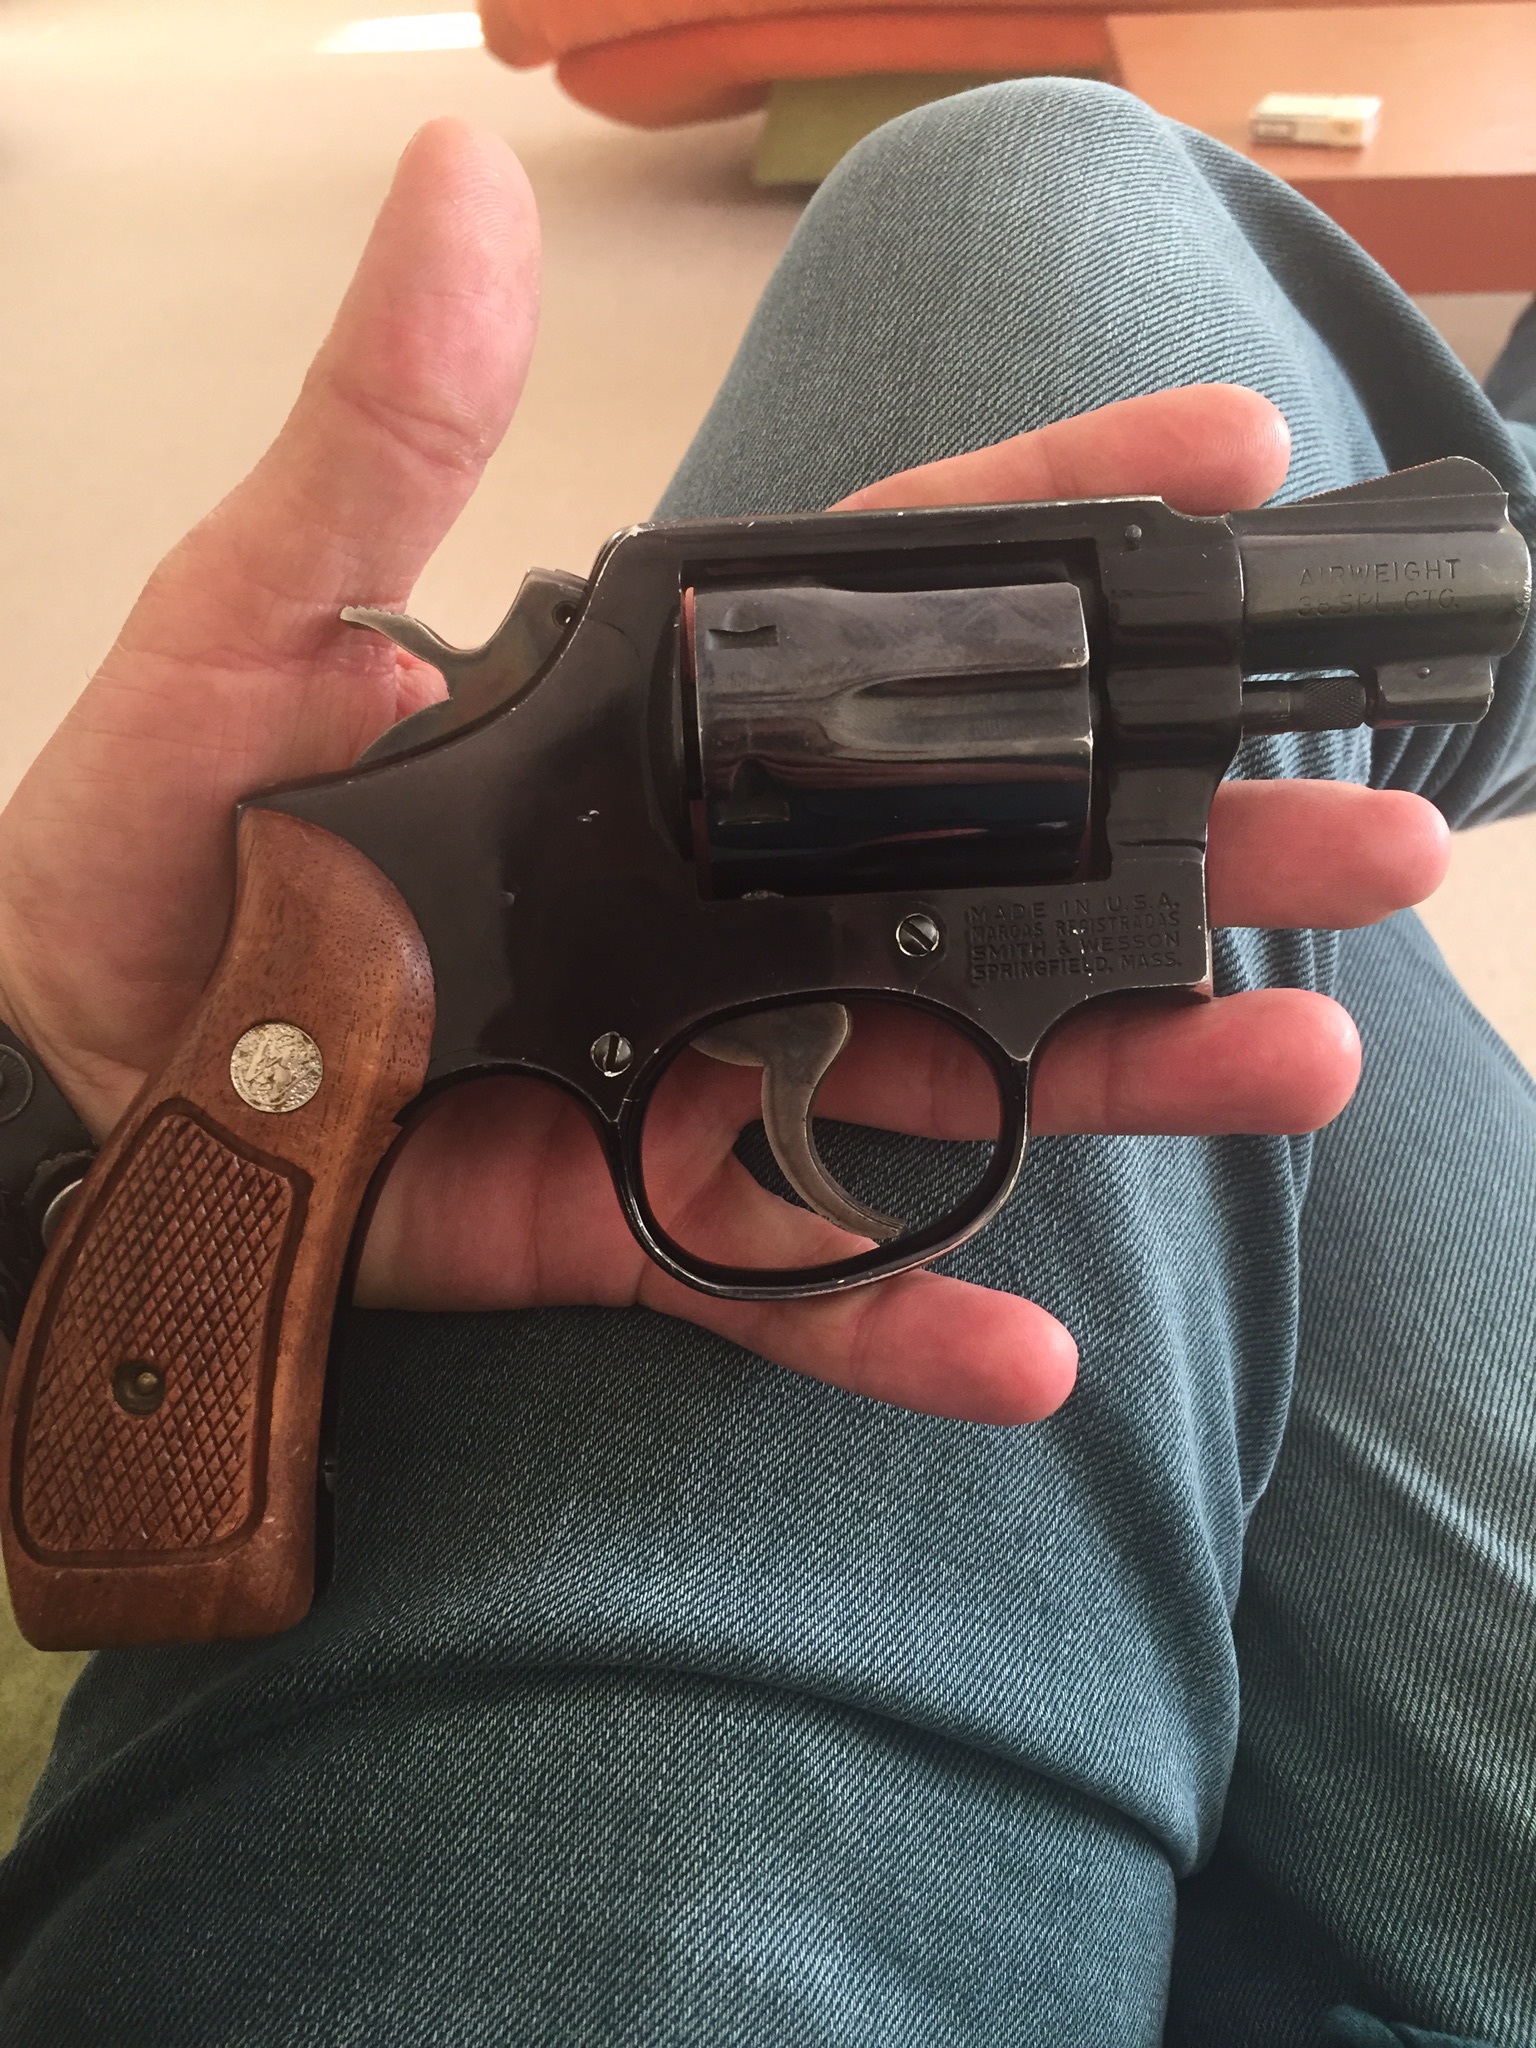 SMITH WESSON